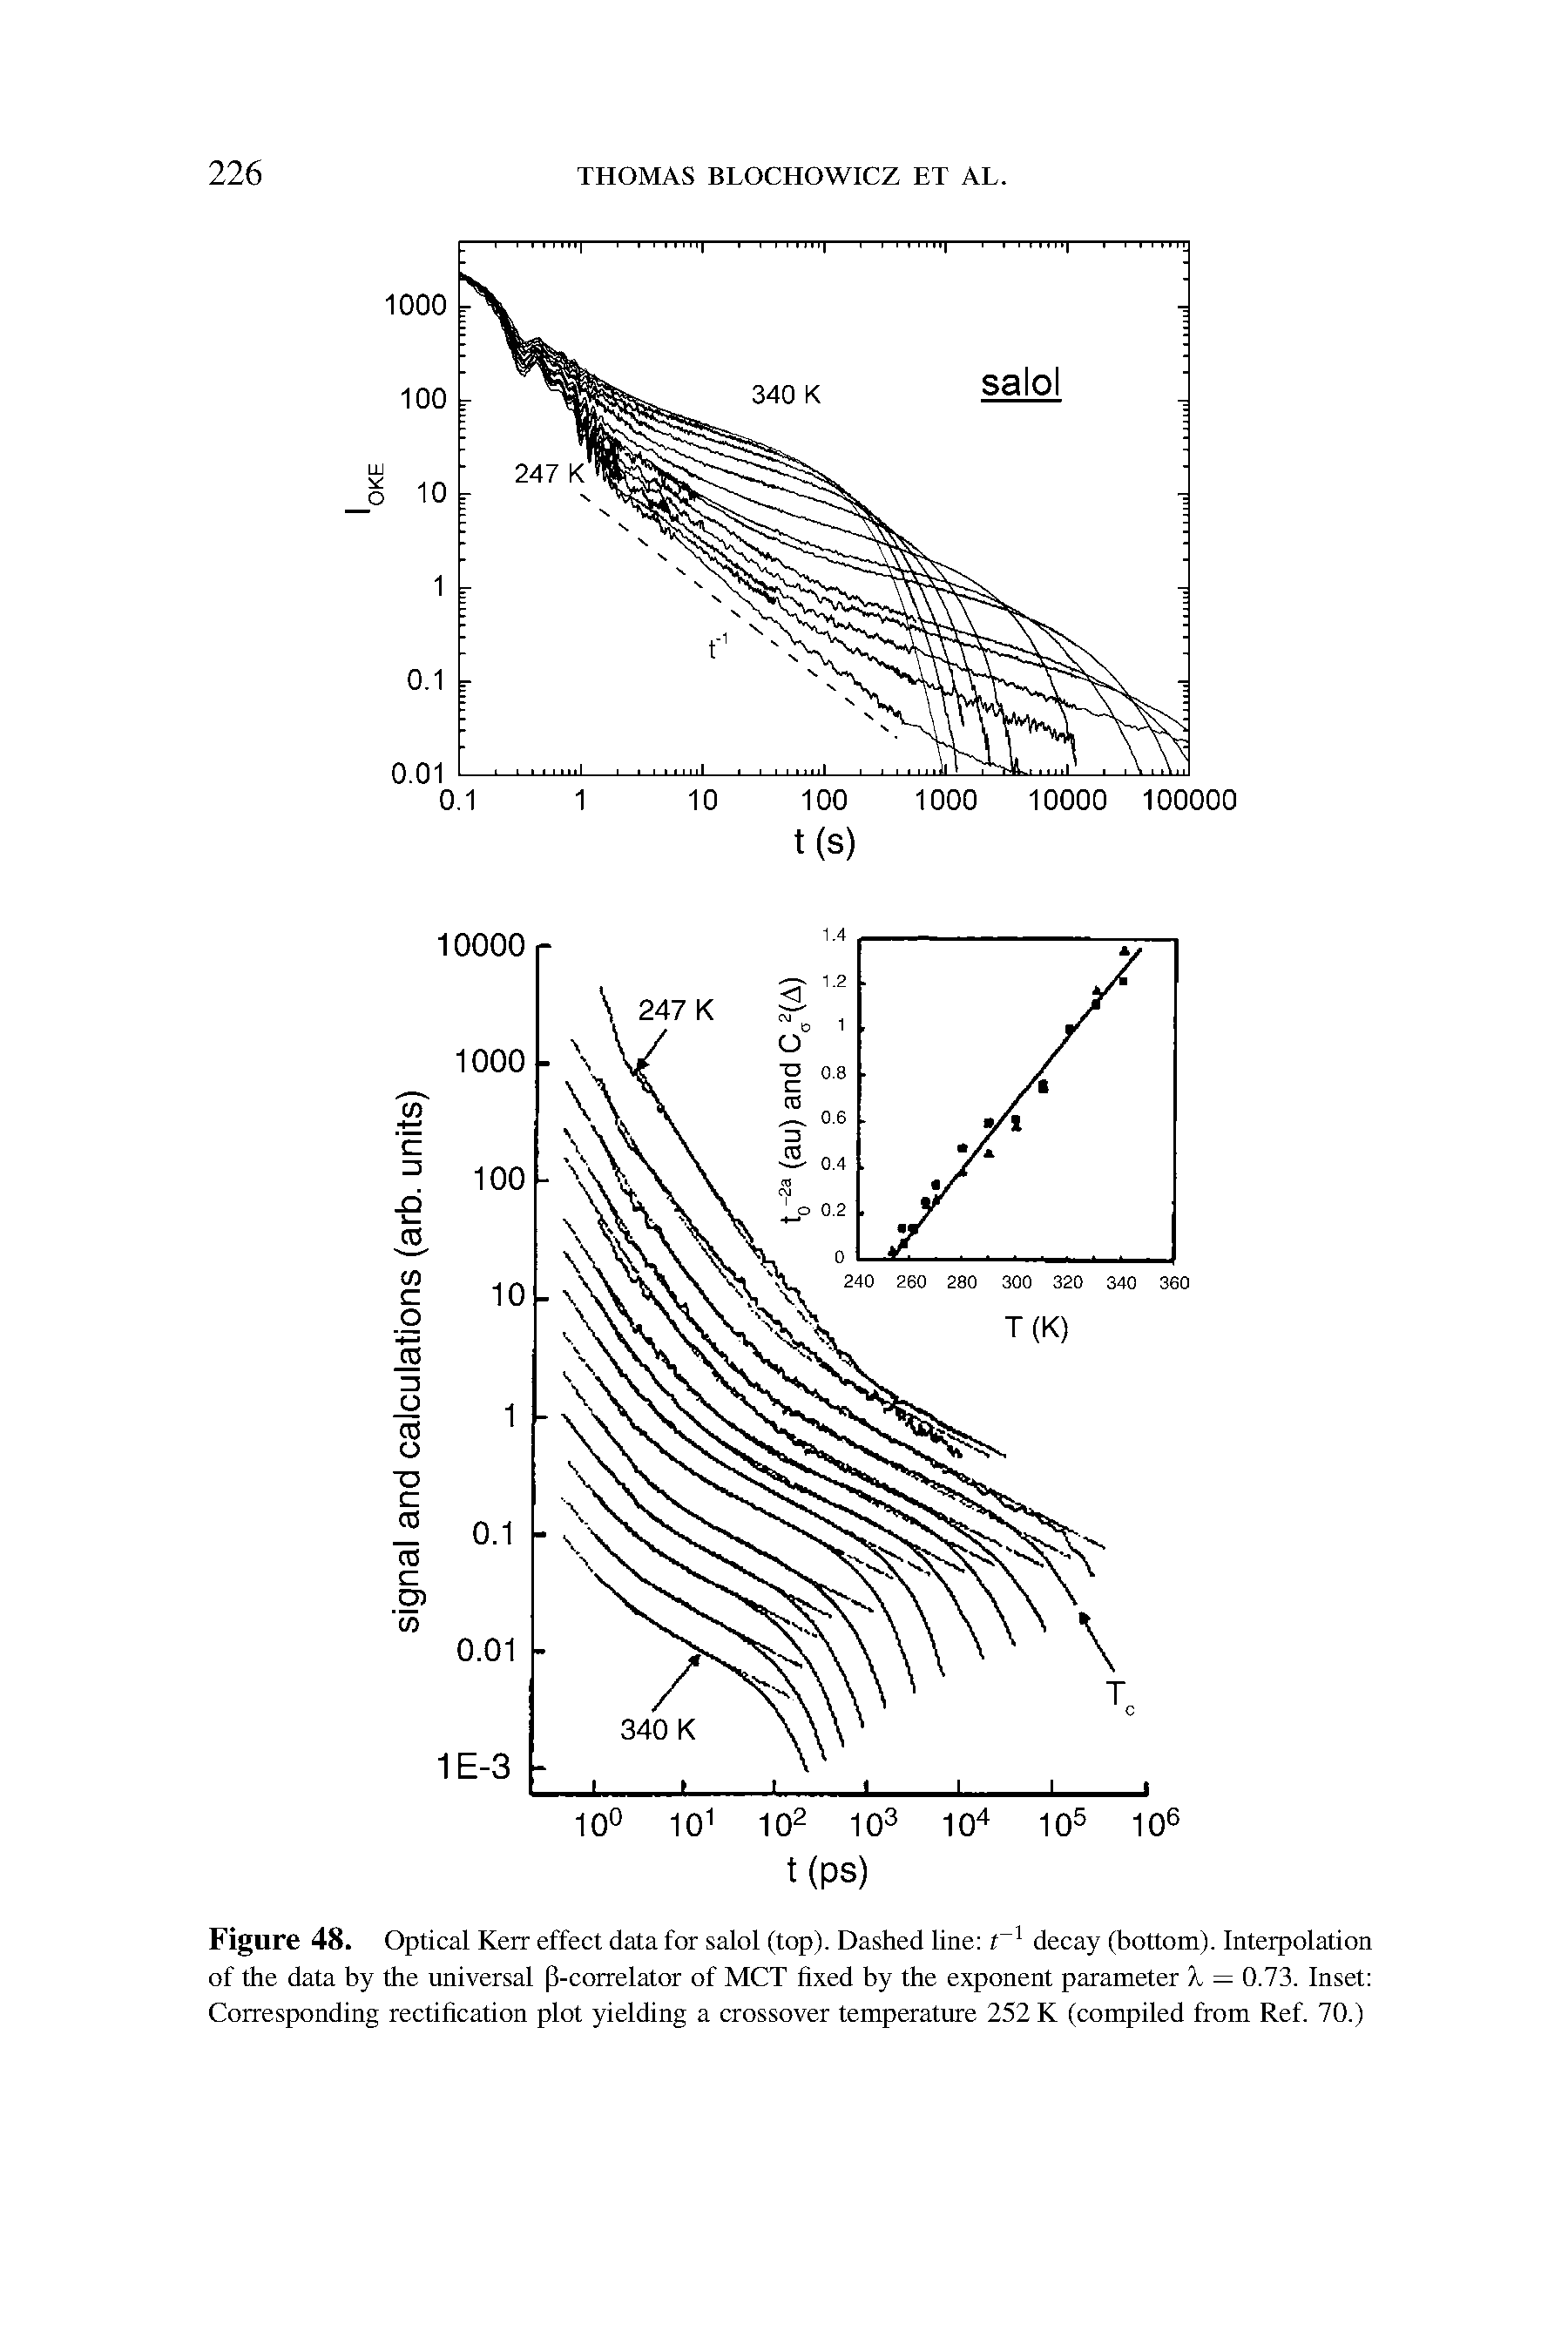 Figure 48. Optical Kerr effect data for salol (top). Dashed line t l decay (bottom). Interpolation of the data by the universal p-correlator of MCT fixed by the exponent parameter X — 0.73. Inset Corresponding rectification plot yielding a crossover temperature 252 K (compiled from Ref. 70.)...